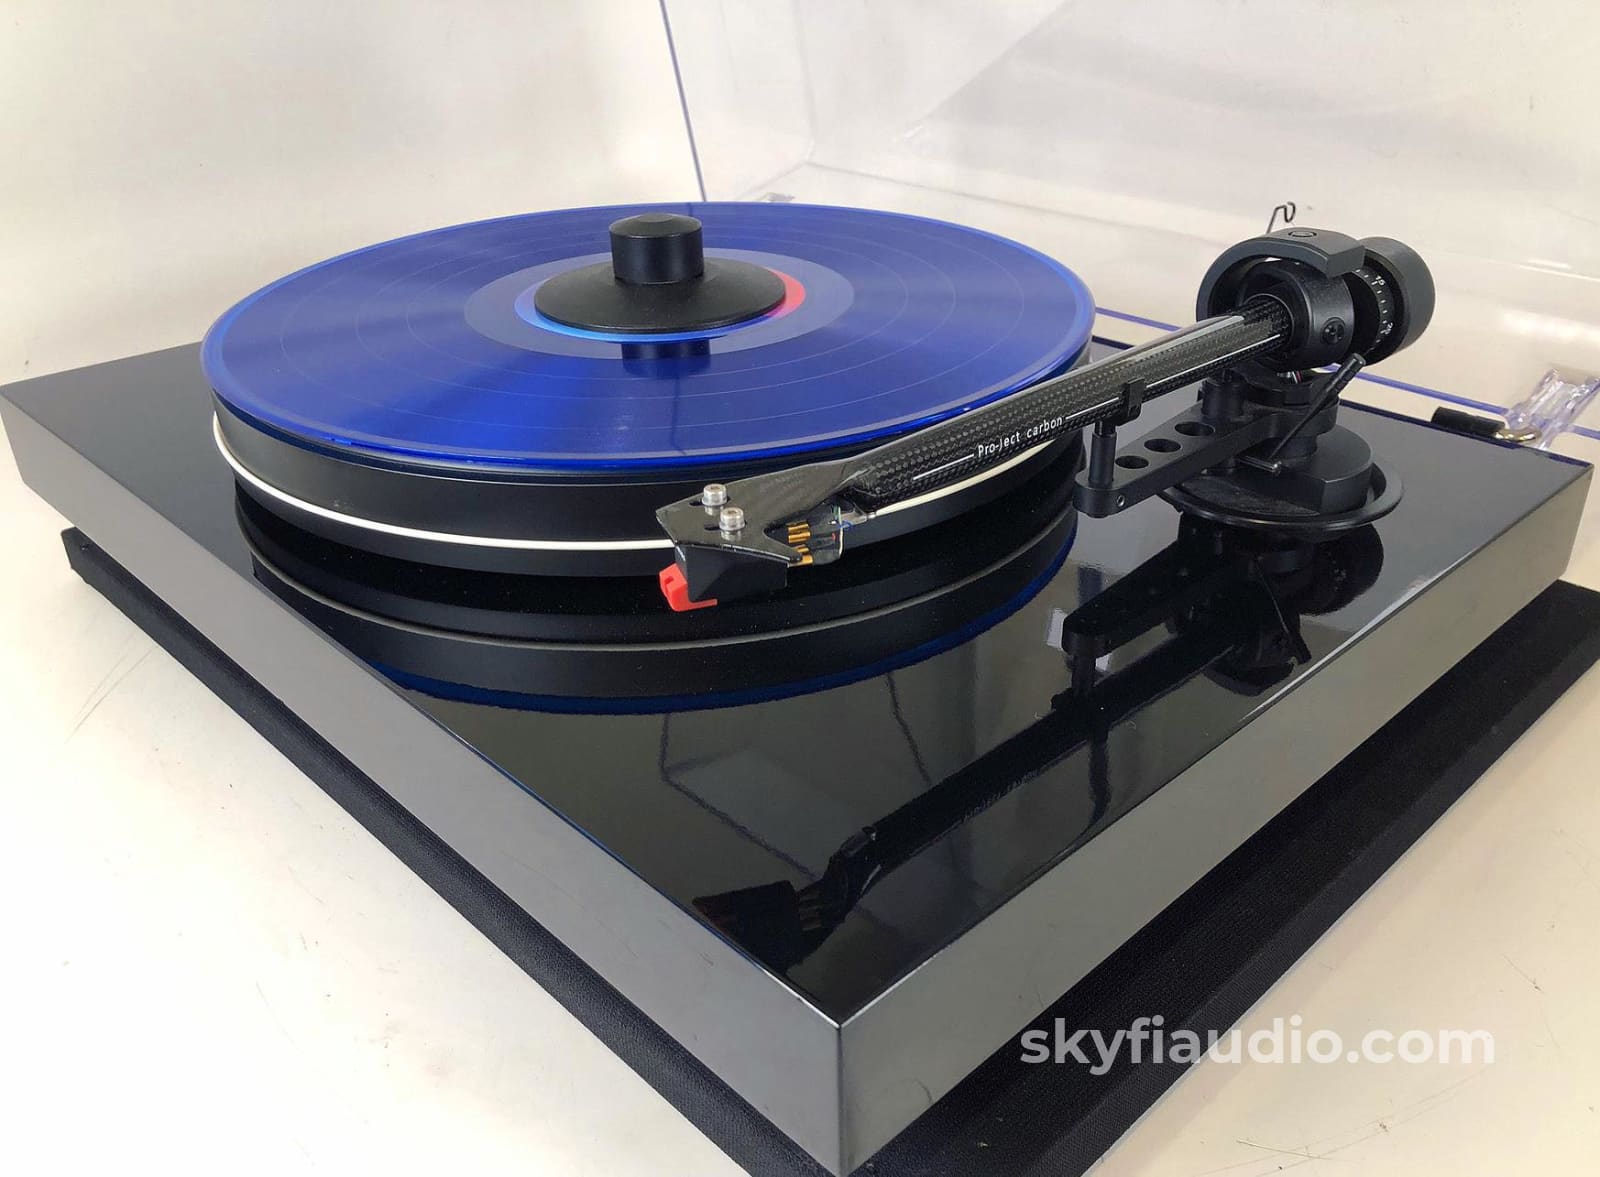 Products - Pro-Ject Audio USA